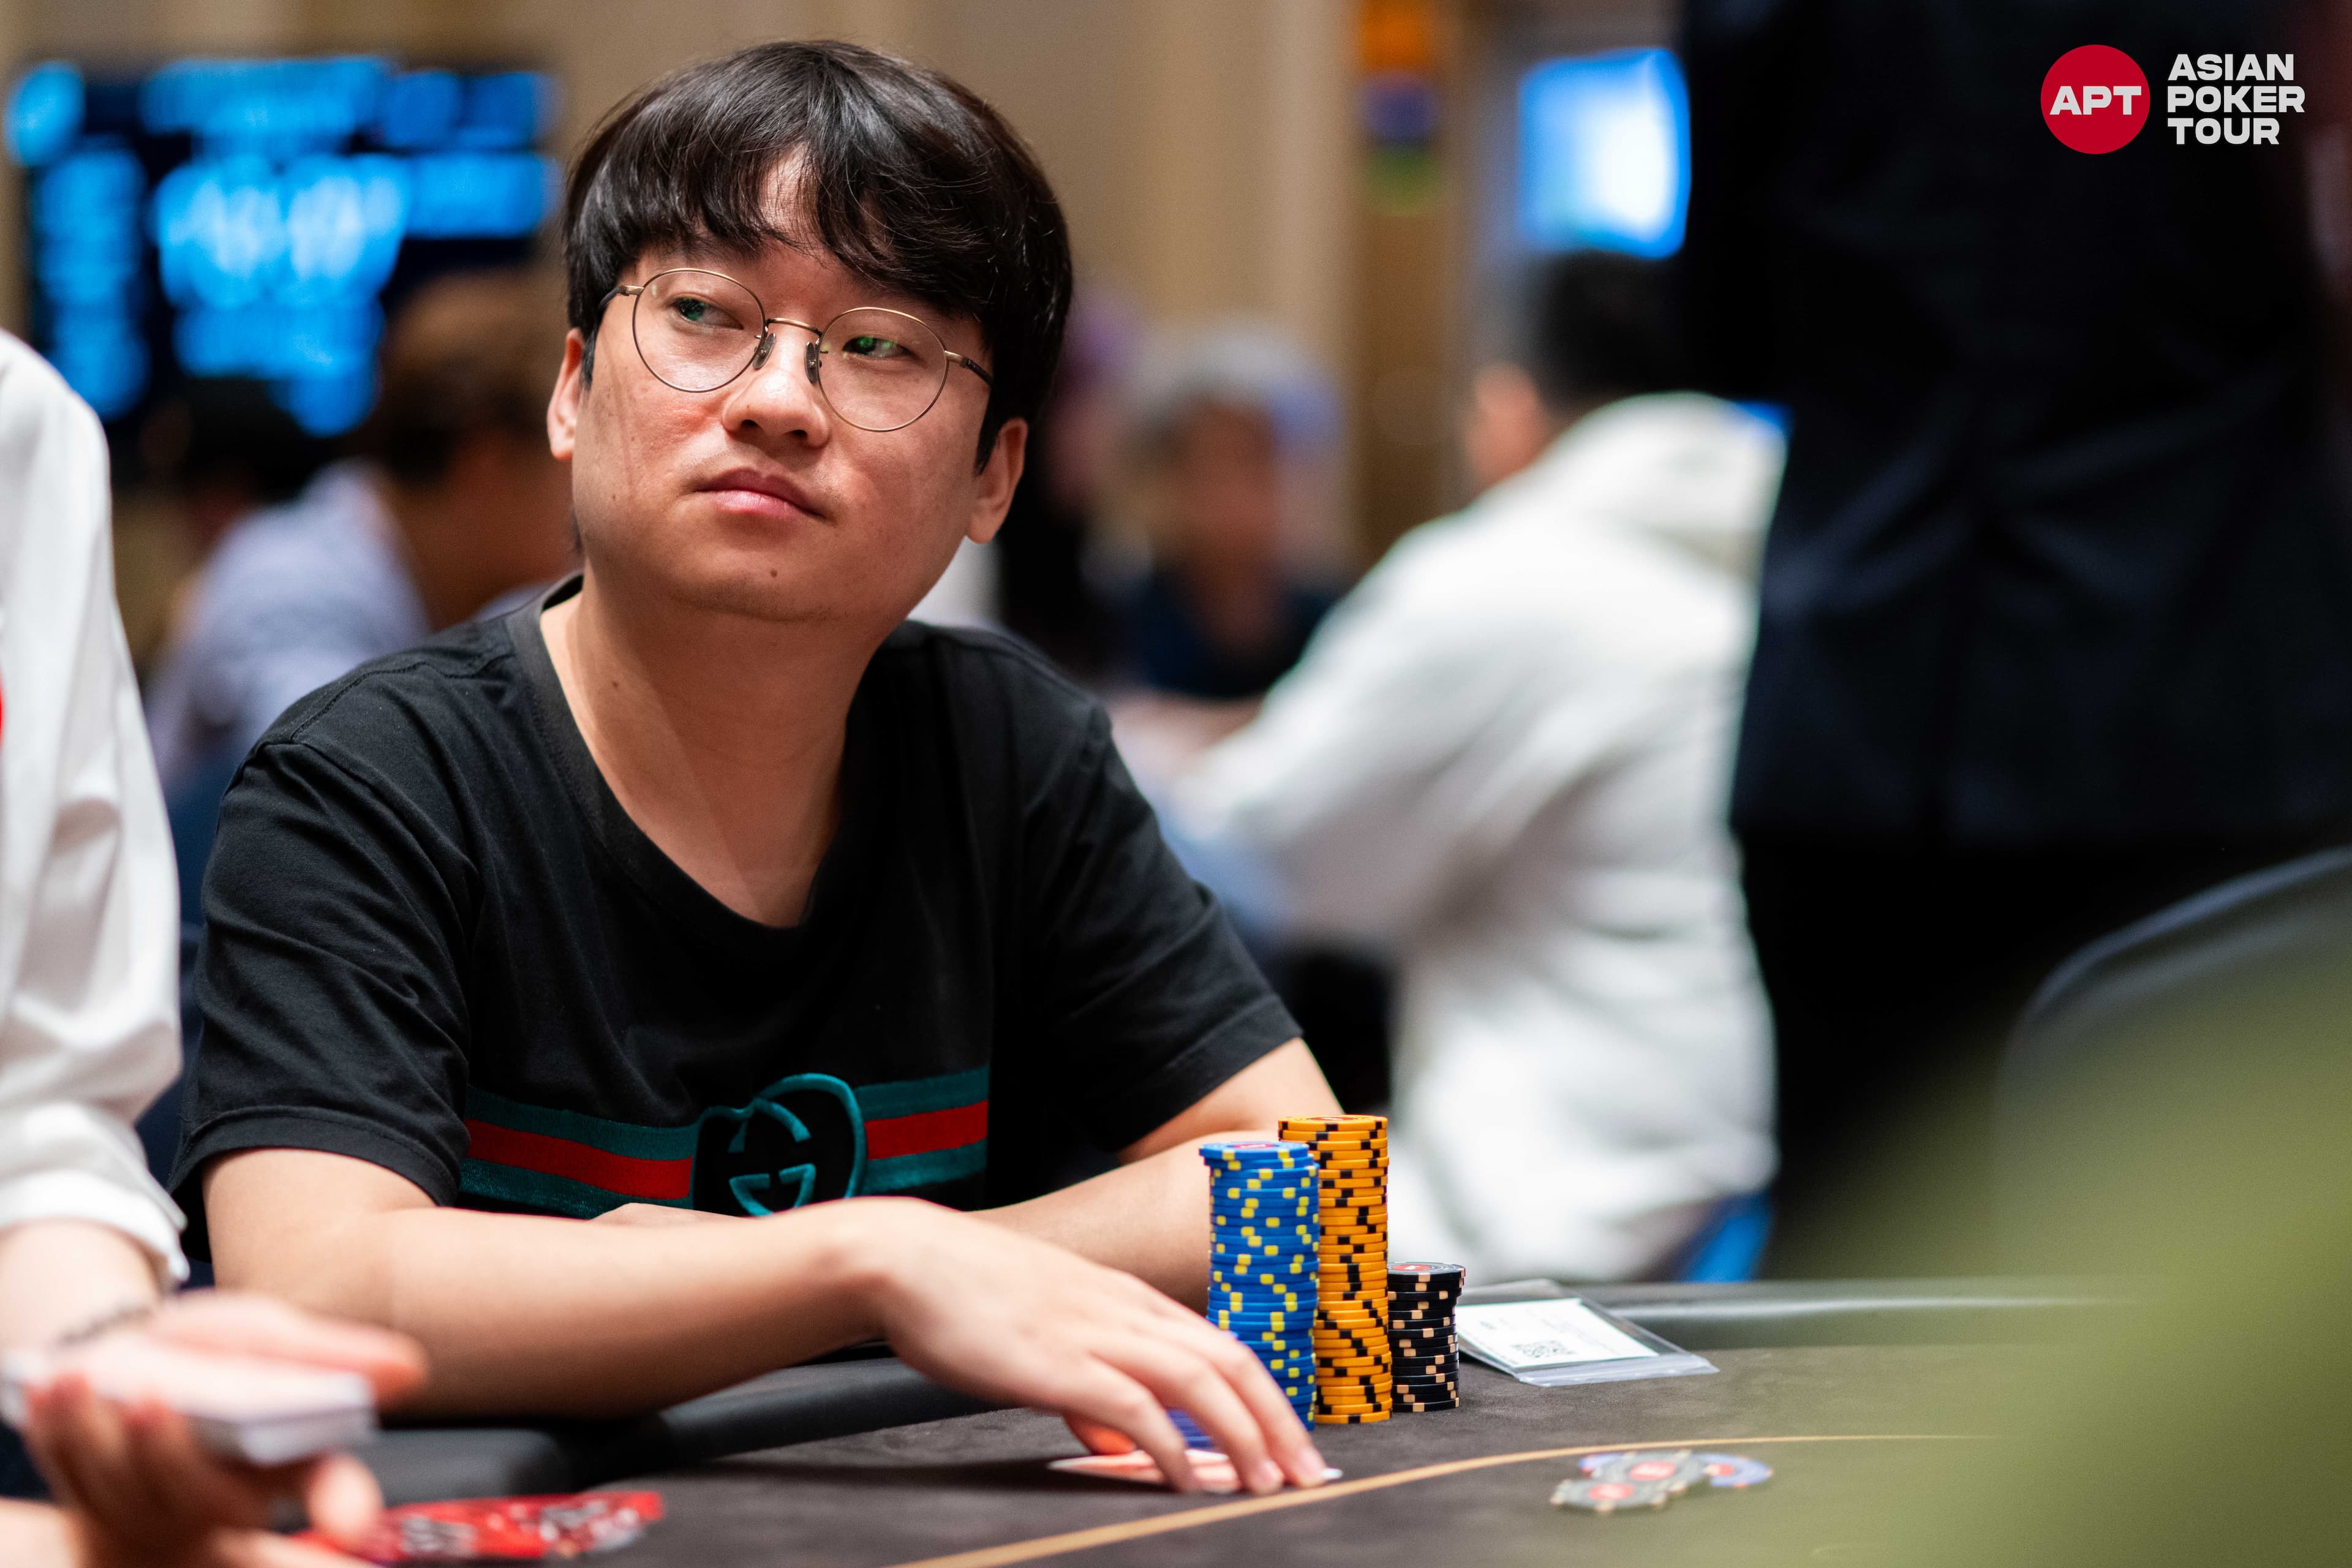 Main Event Sets New APT Country Record With Registration Still Open; Mike Takayama and Punnat Punsri Both Bag Big